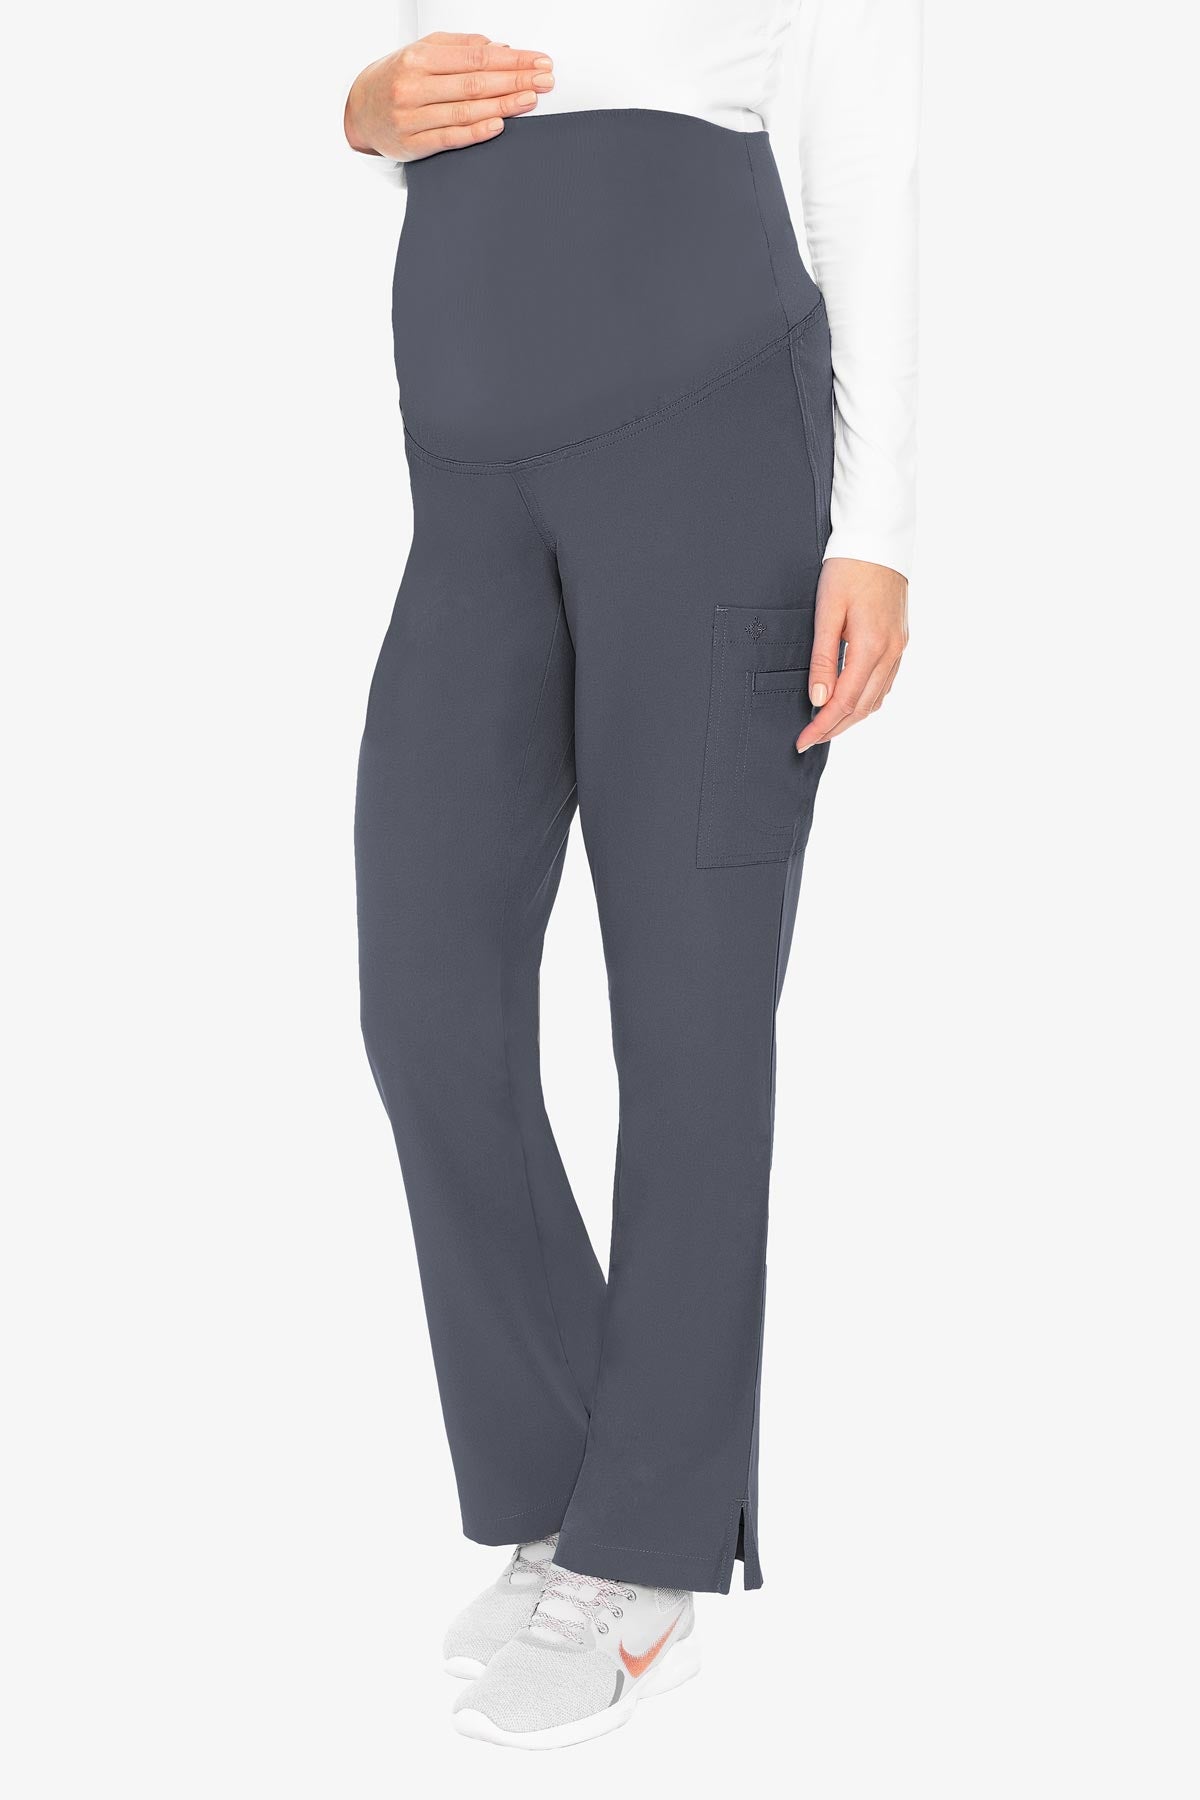 MED COUTURE 8727 MATERNITY PANT